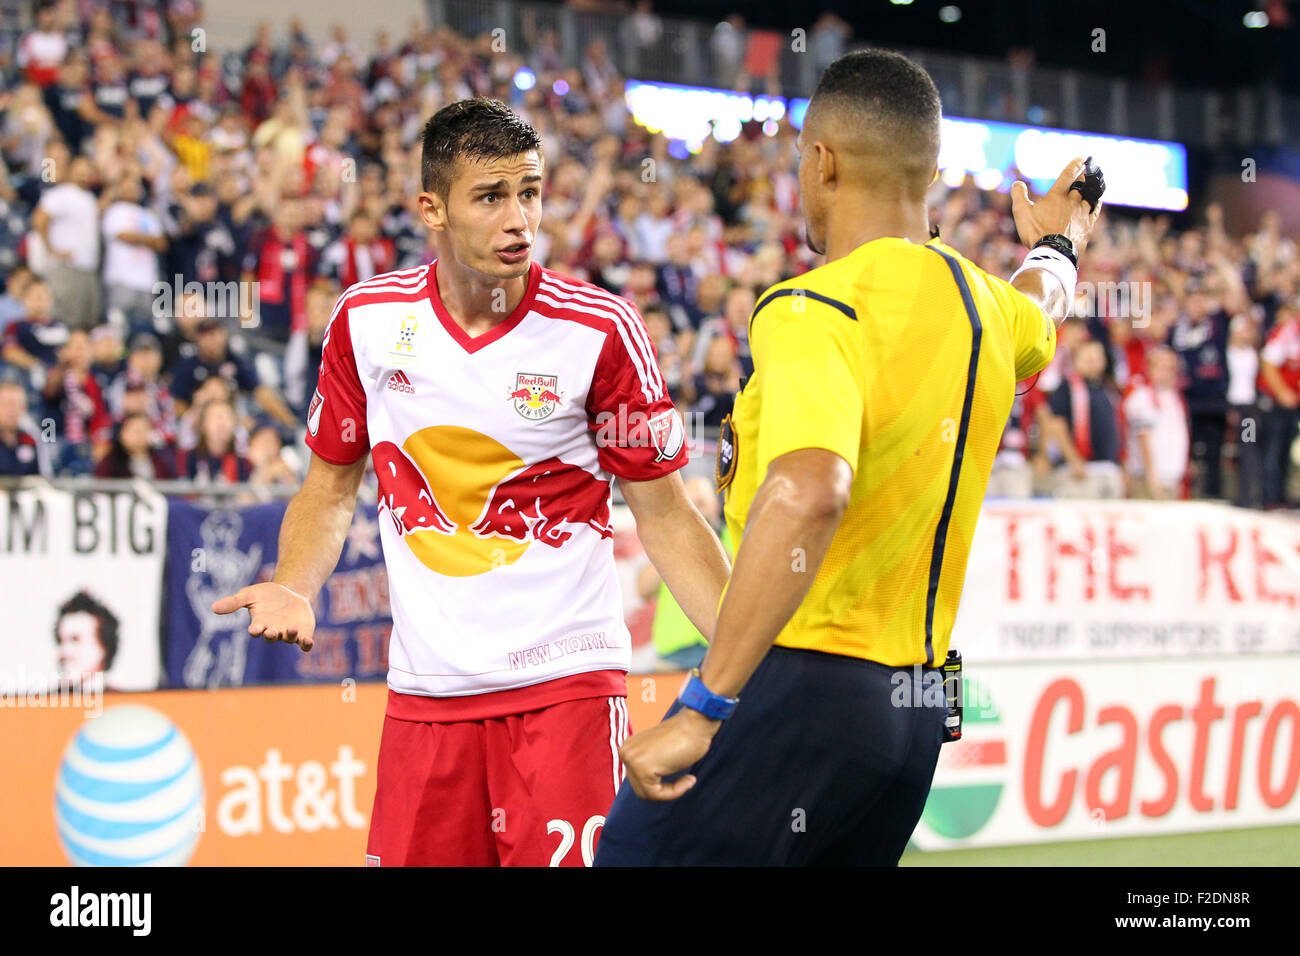 Foxborough, Massachussetts, USA. 16th September, 2015. New York Red Bulls defender Matt Miazga (20) reacts after receiving a yellow card during the MLS game between the New England Revolution and New York Red Bulls at Gillette Stadium. New England defeated New York 2-1. Credit:  Cal Sport Media/Alamy Live News Stock Photo